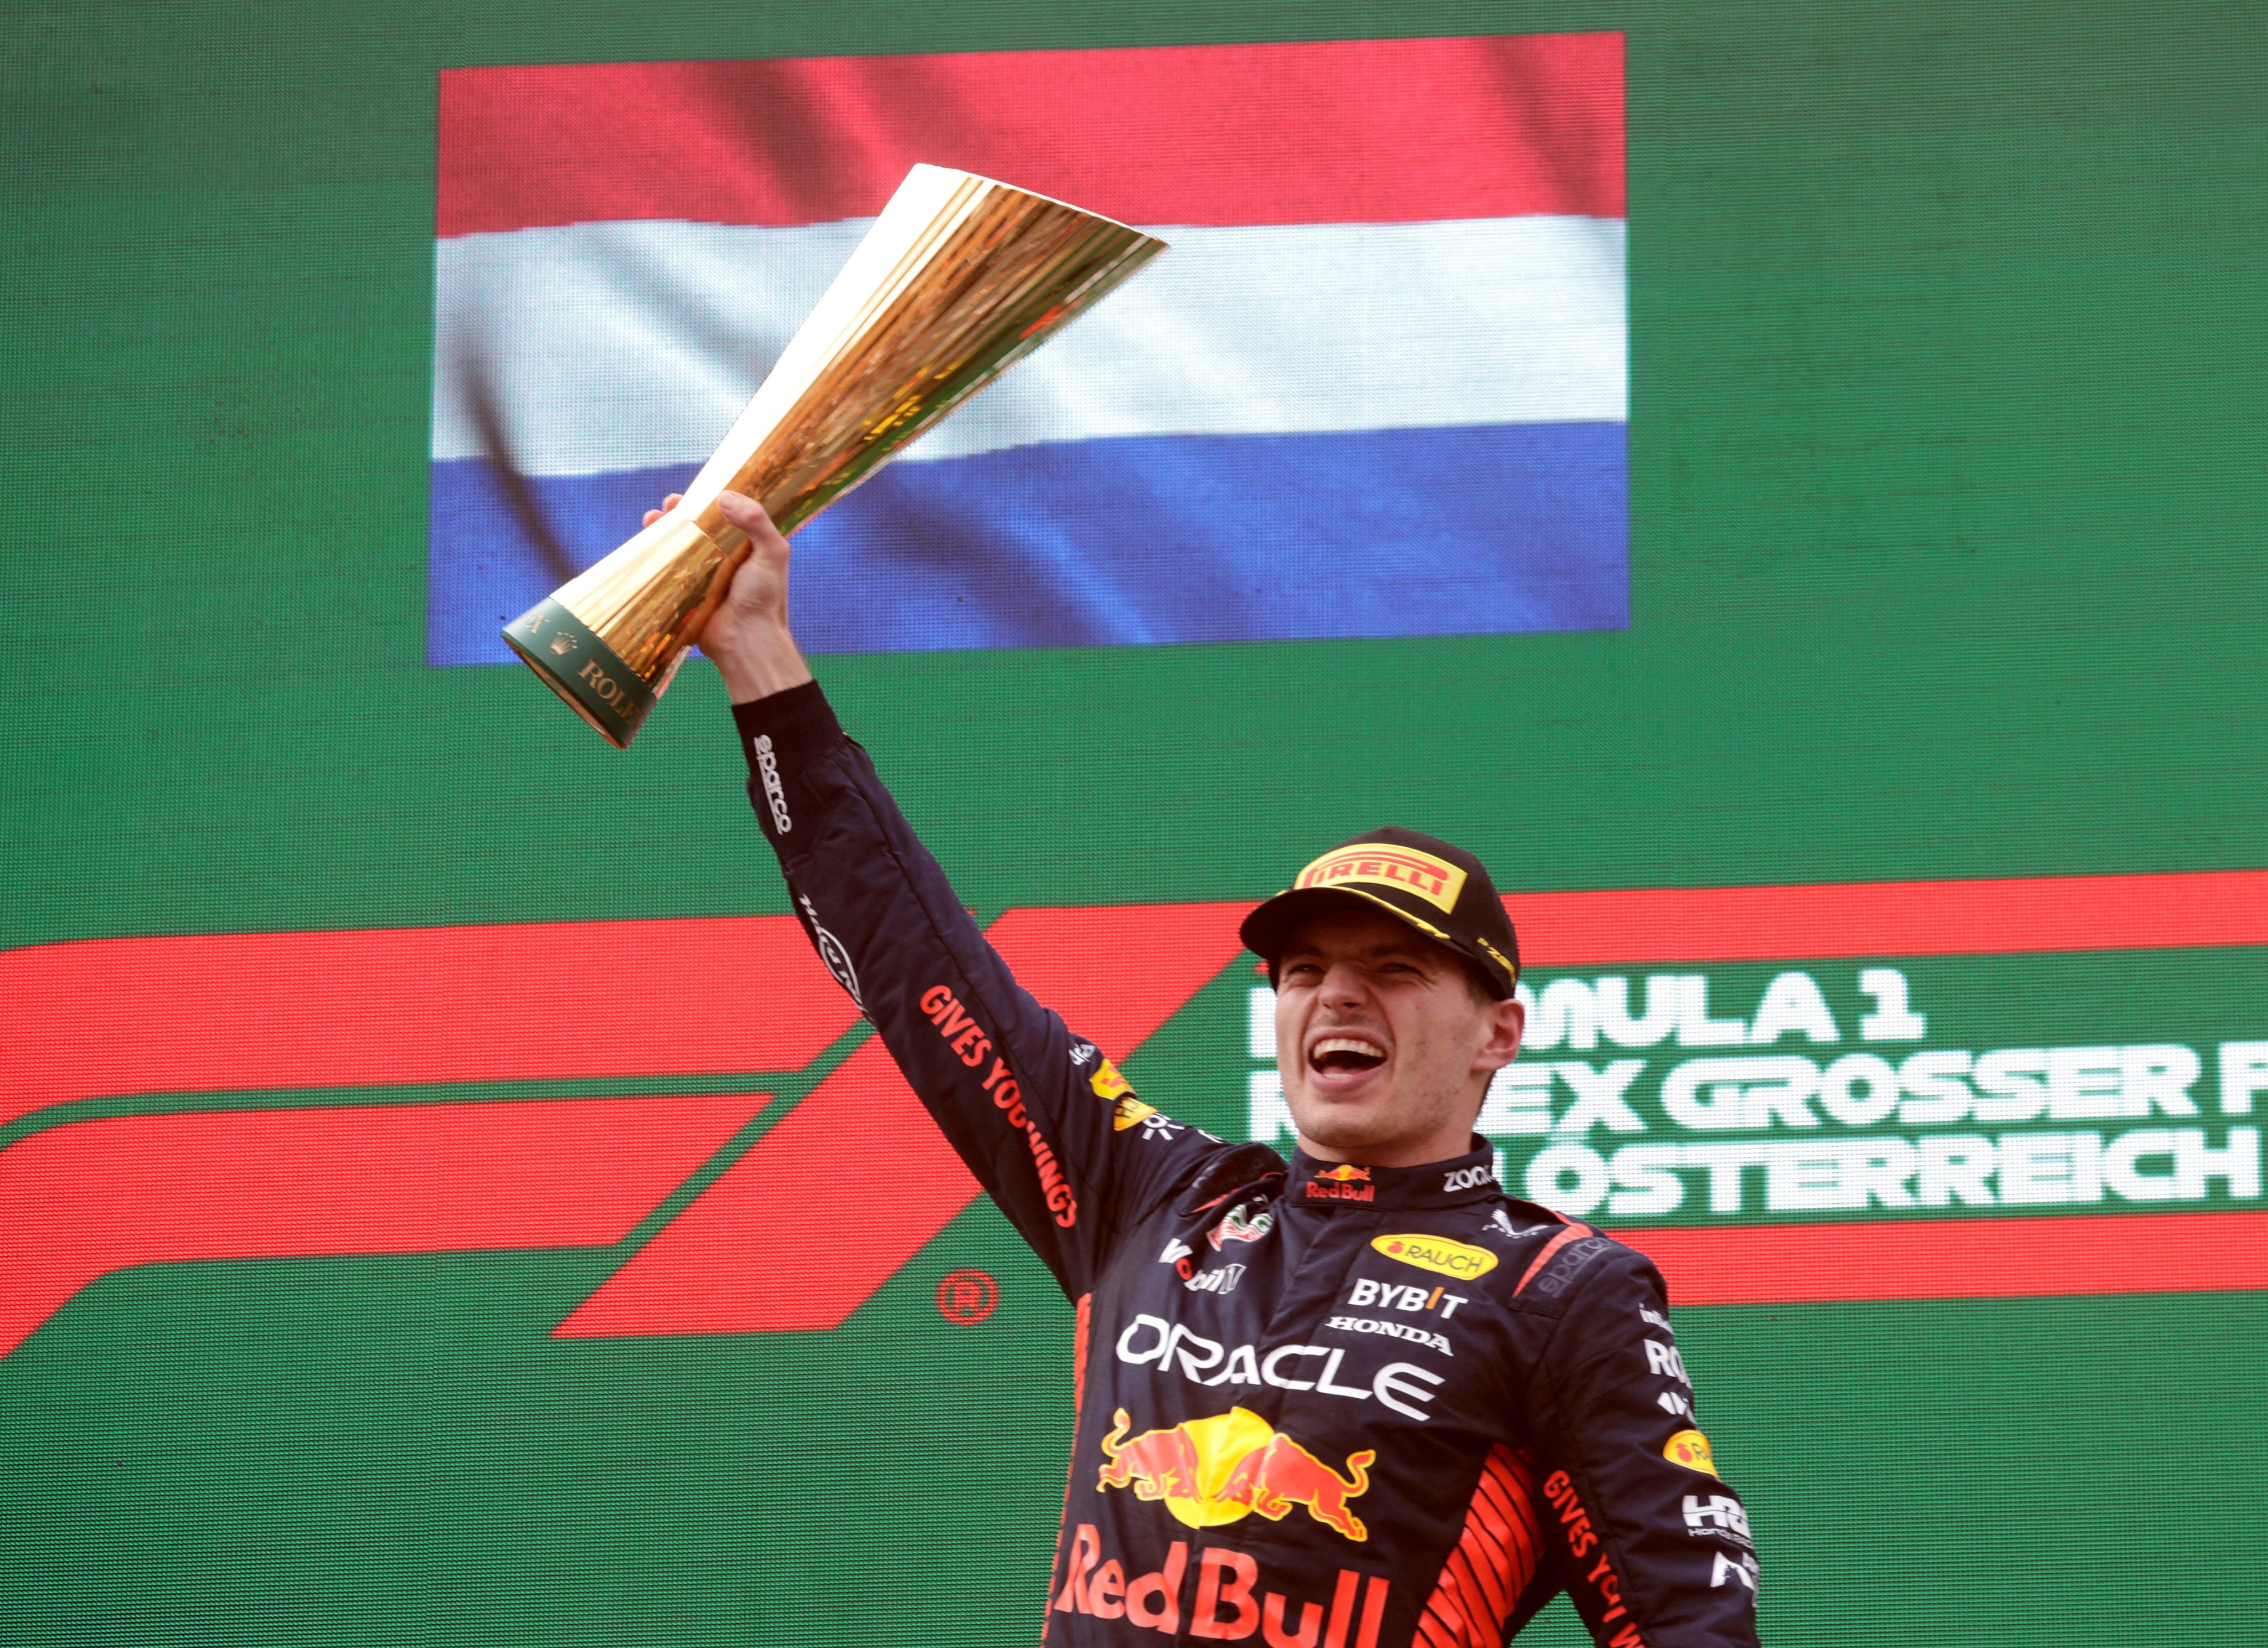 Red Bull’s Max Verstappen celebrates with a trophy on the podium after winning the Austrian Grand Prix. Photo: Reuters